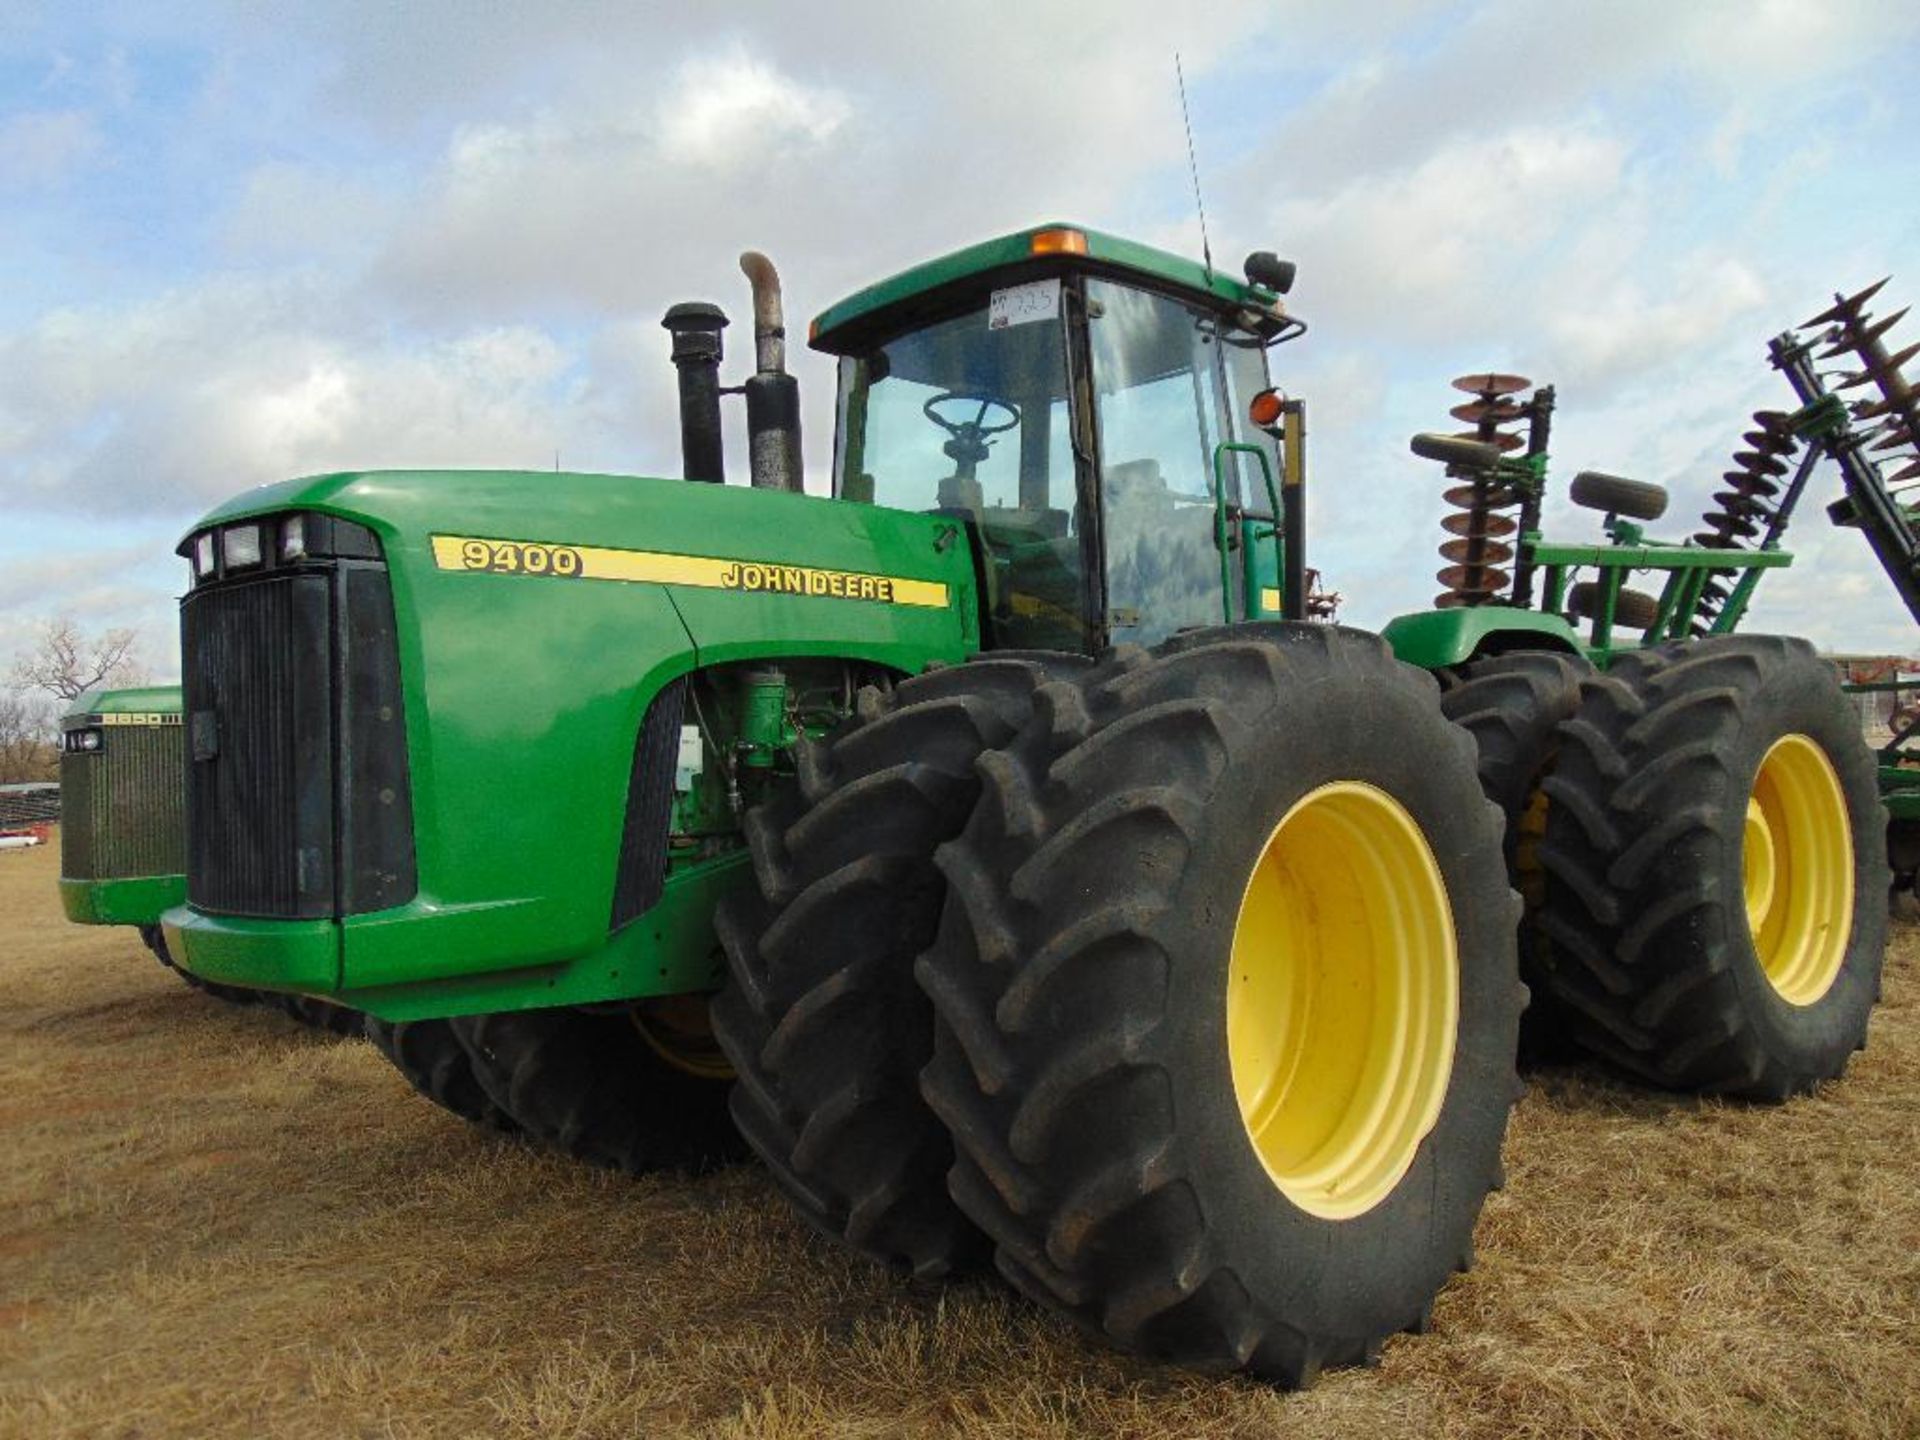 John Deere 9400 4x4 Farm Tractor, s/m p030793, cab, a/c, 4 hyd, duals, hour meter reads 4748 hrs,